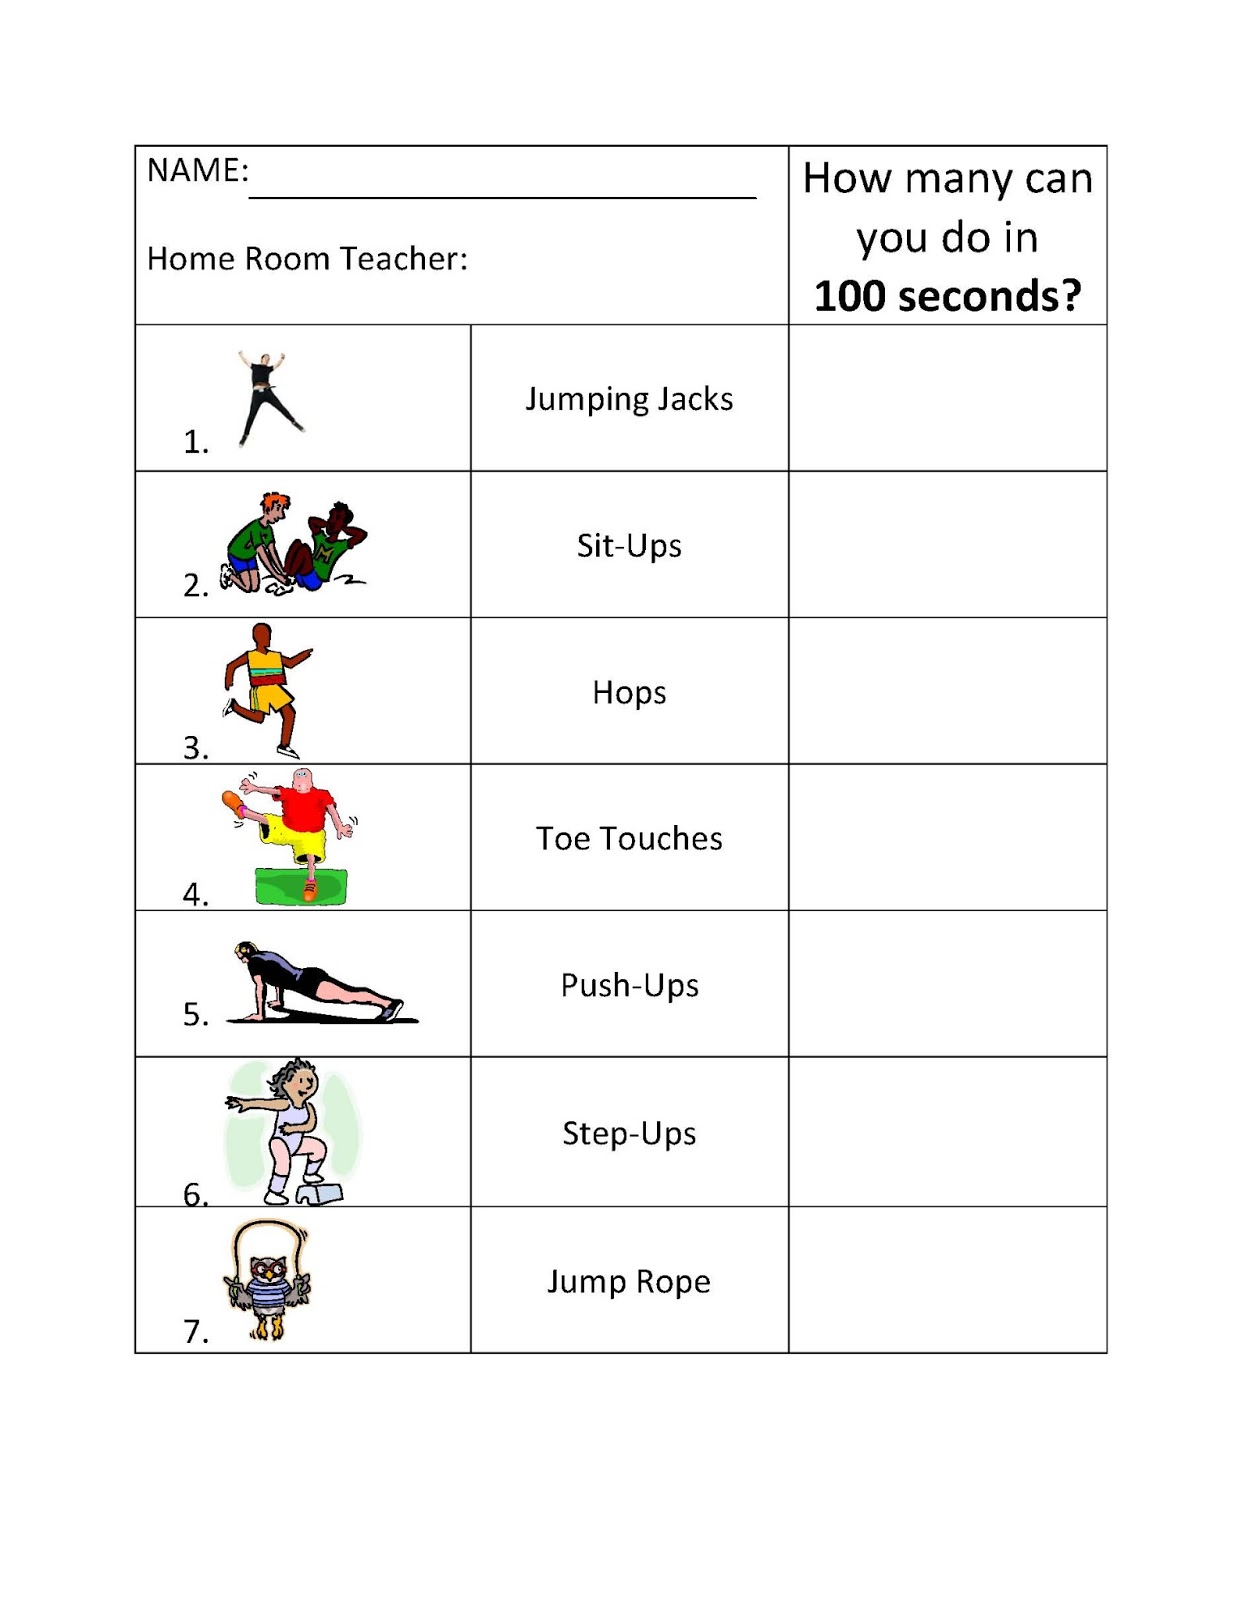 Physical Education and More: 100 Second Challenge